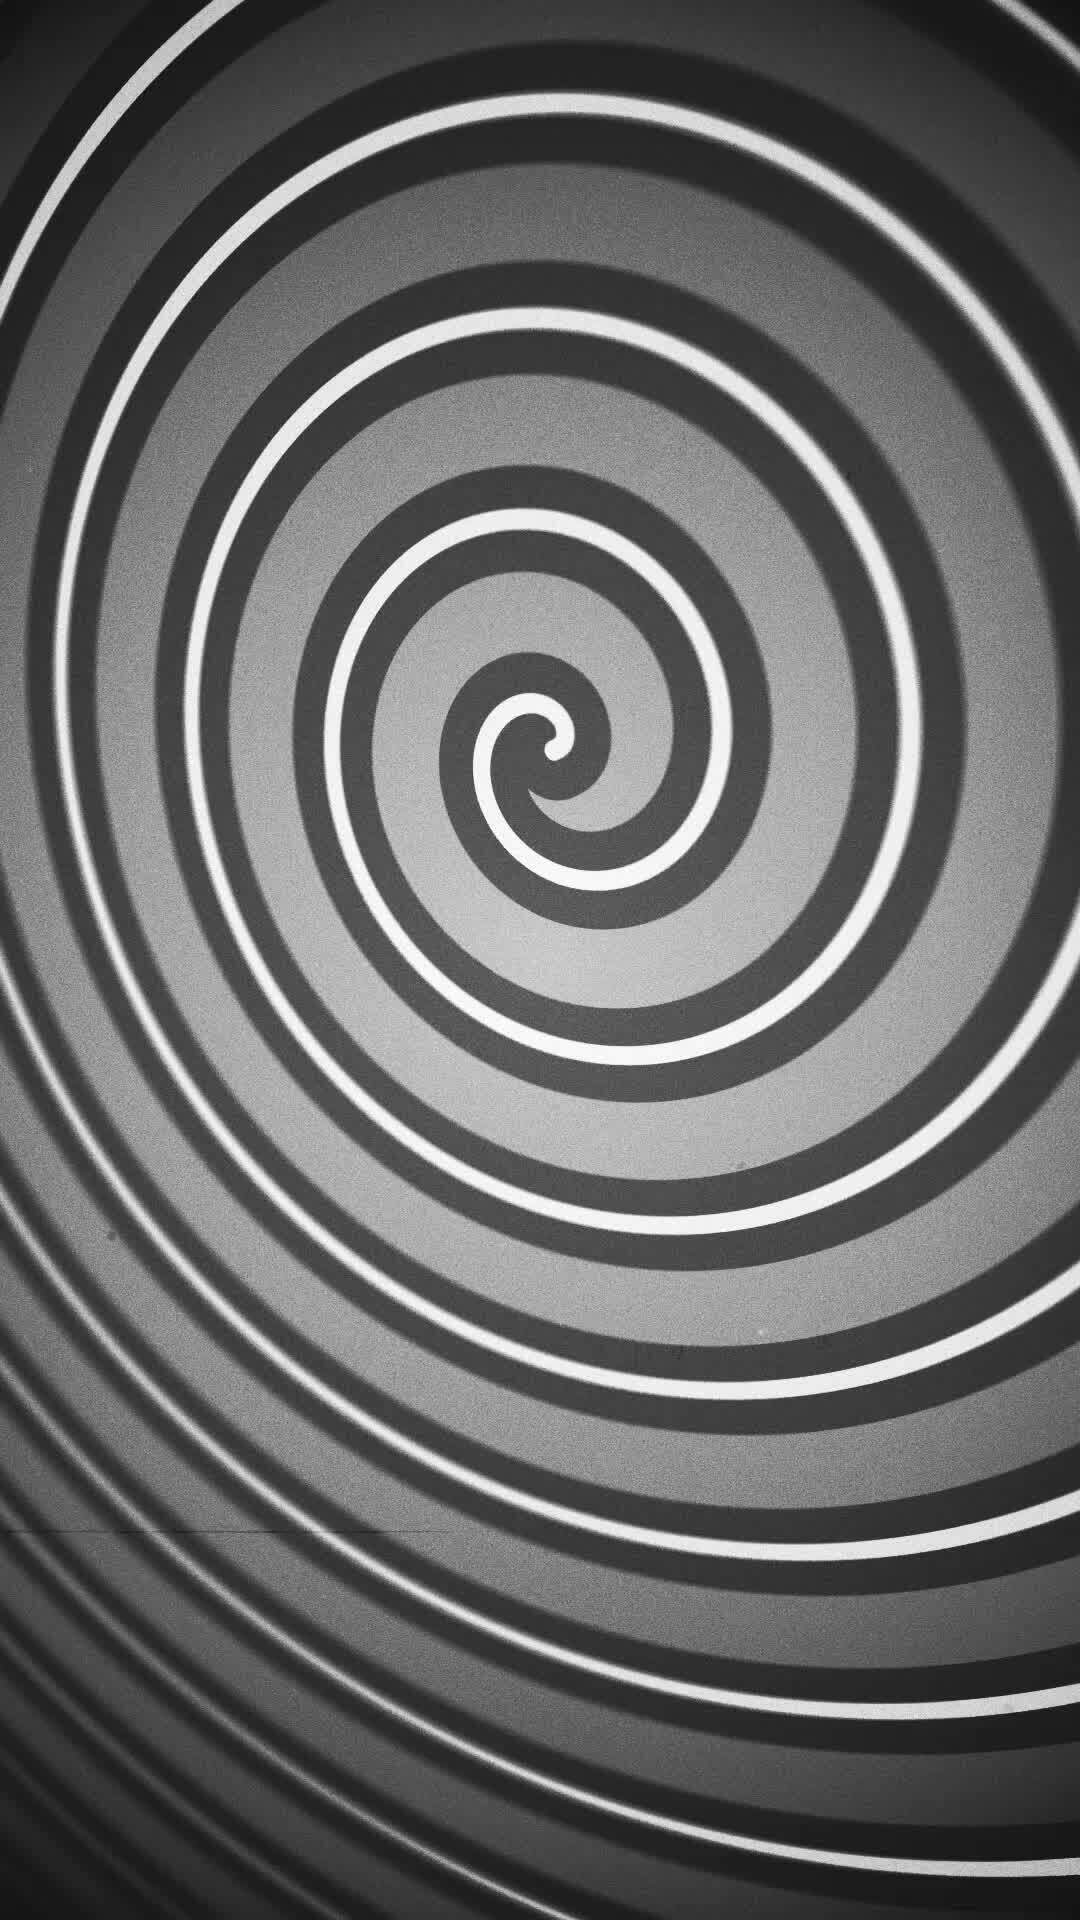 Vertical video - retro vintage hypnotic circus style spiral motion